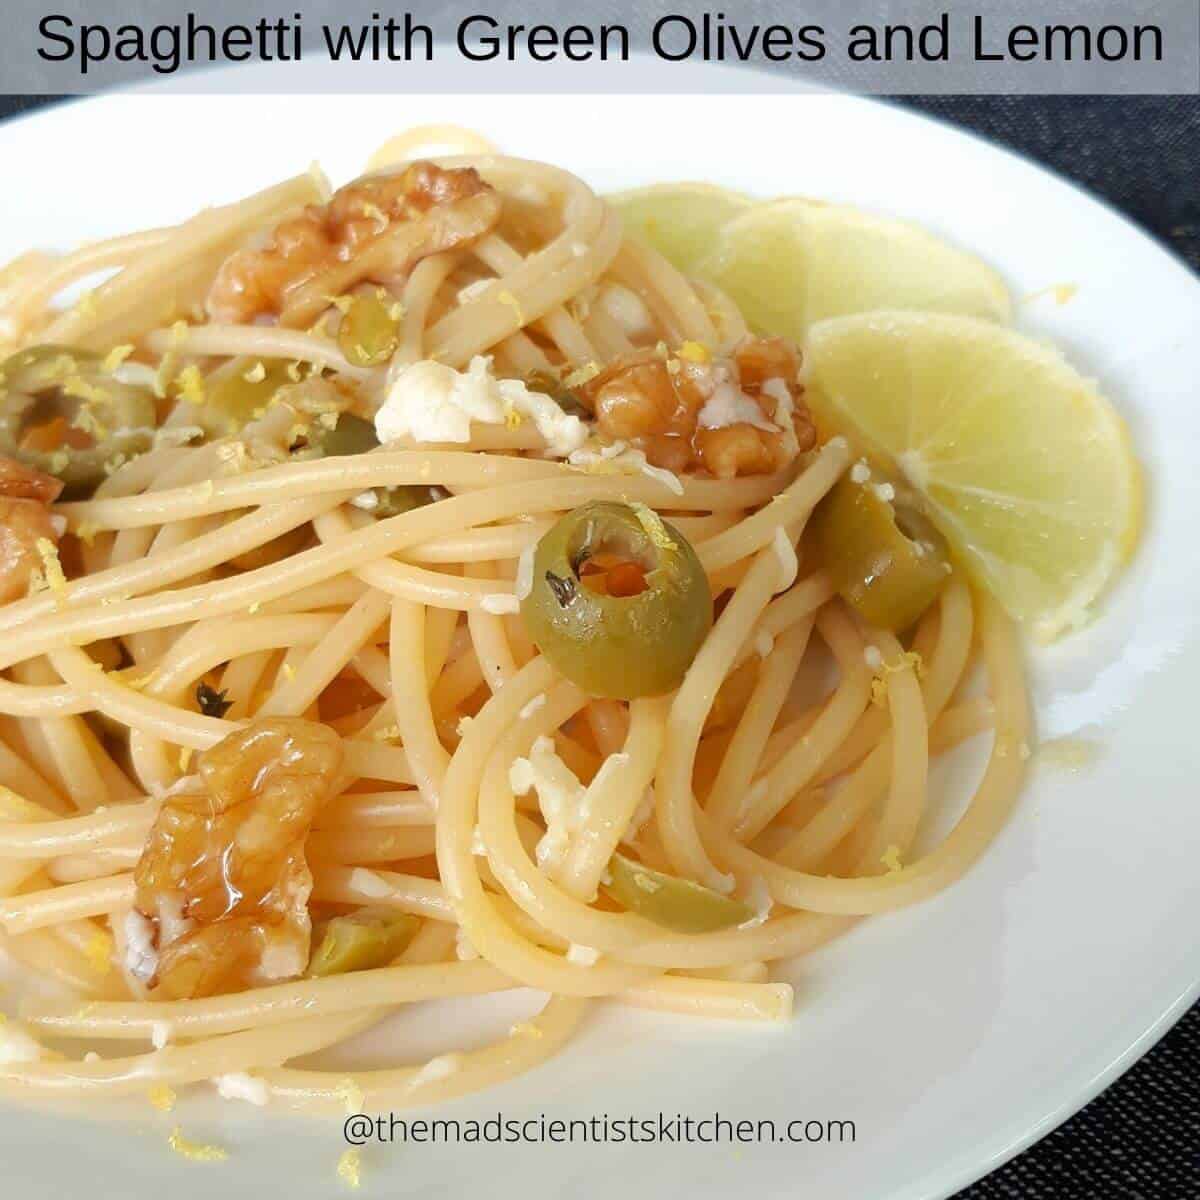 Spaghetti with Green Olives and Lemon, a serving